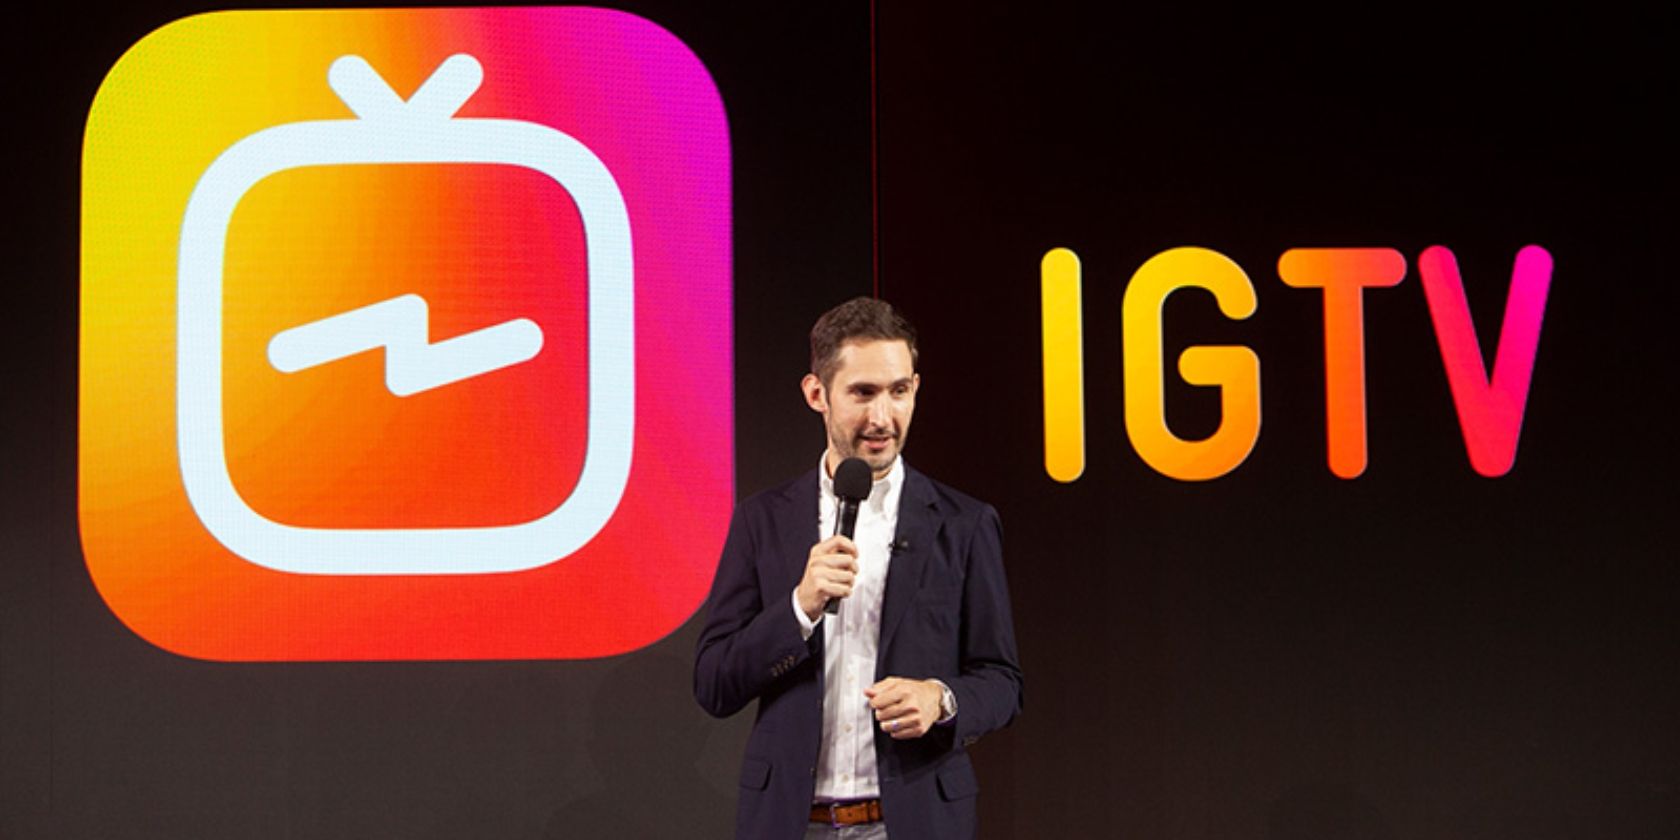 Kevin Systrom launches IGTV